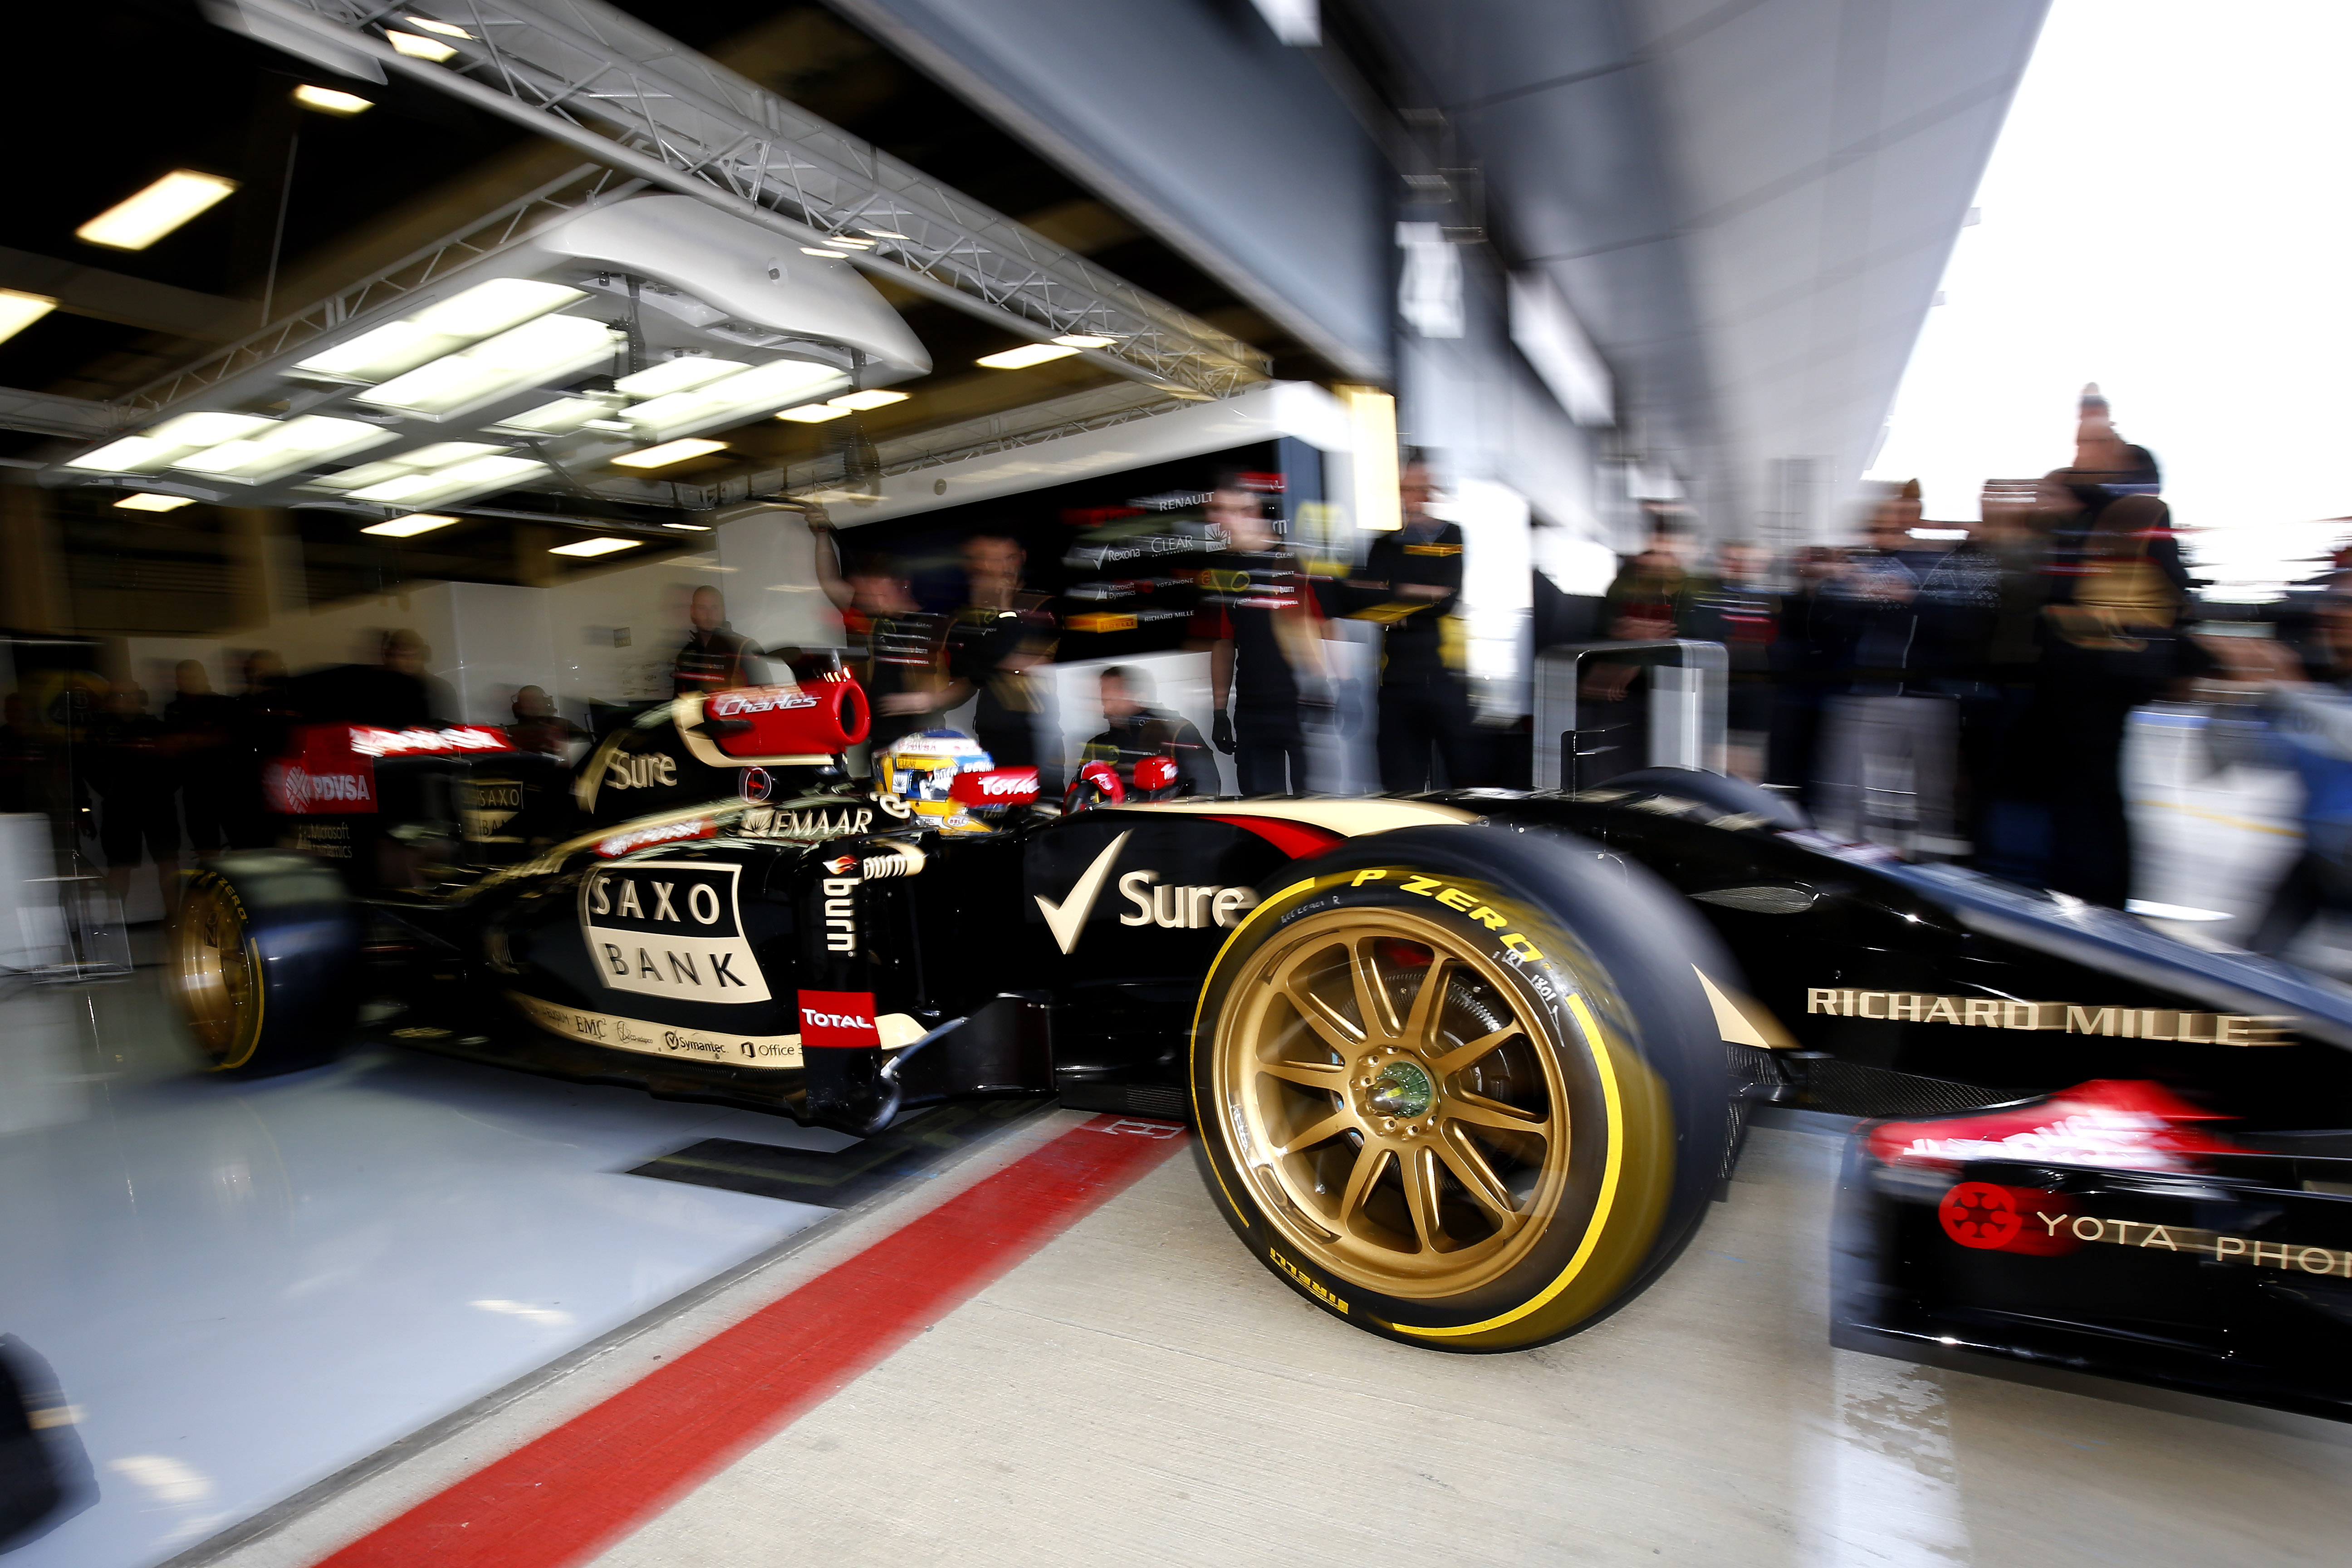 the_lotus_team_f1_car_on_18_inch_tyres_drives_out_of_the_garage.jpg